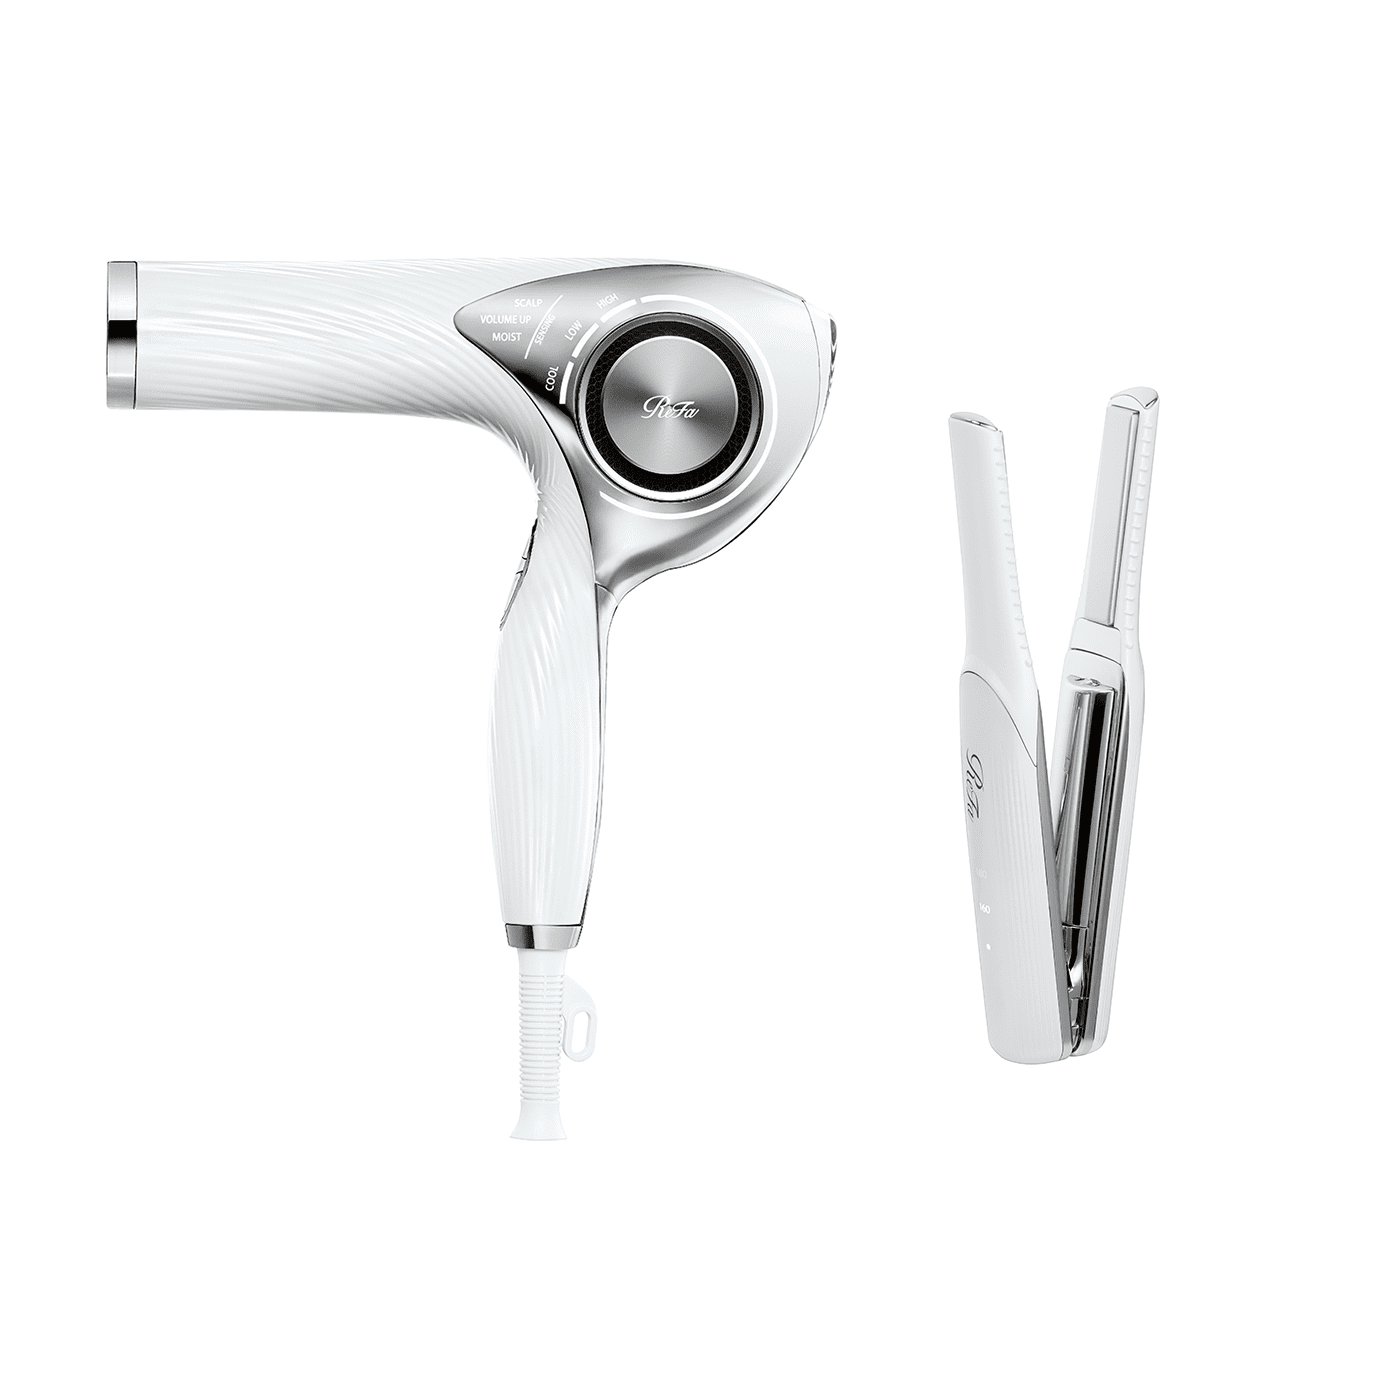 Sales channels are expanding for the ReFa BEAUTECH DRYER PRO and FINGER IRON. Due to their popularity, they launch in department stores on Wednesday, February 9, 2022.